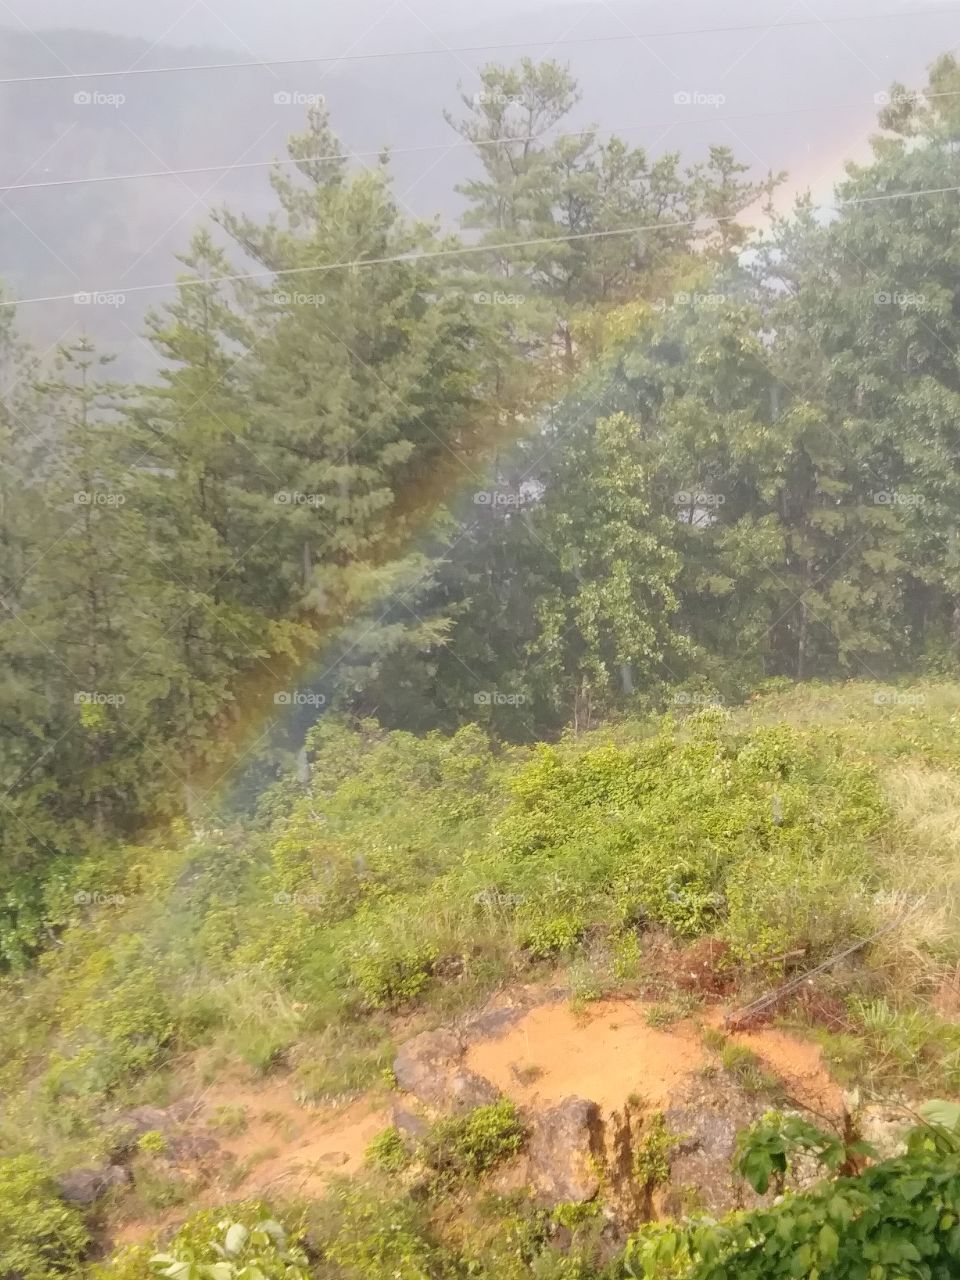 Rainbow touched the ground. Where's the pot of Gold?